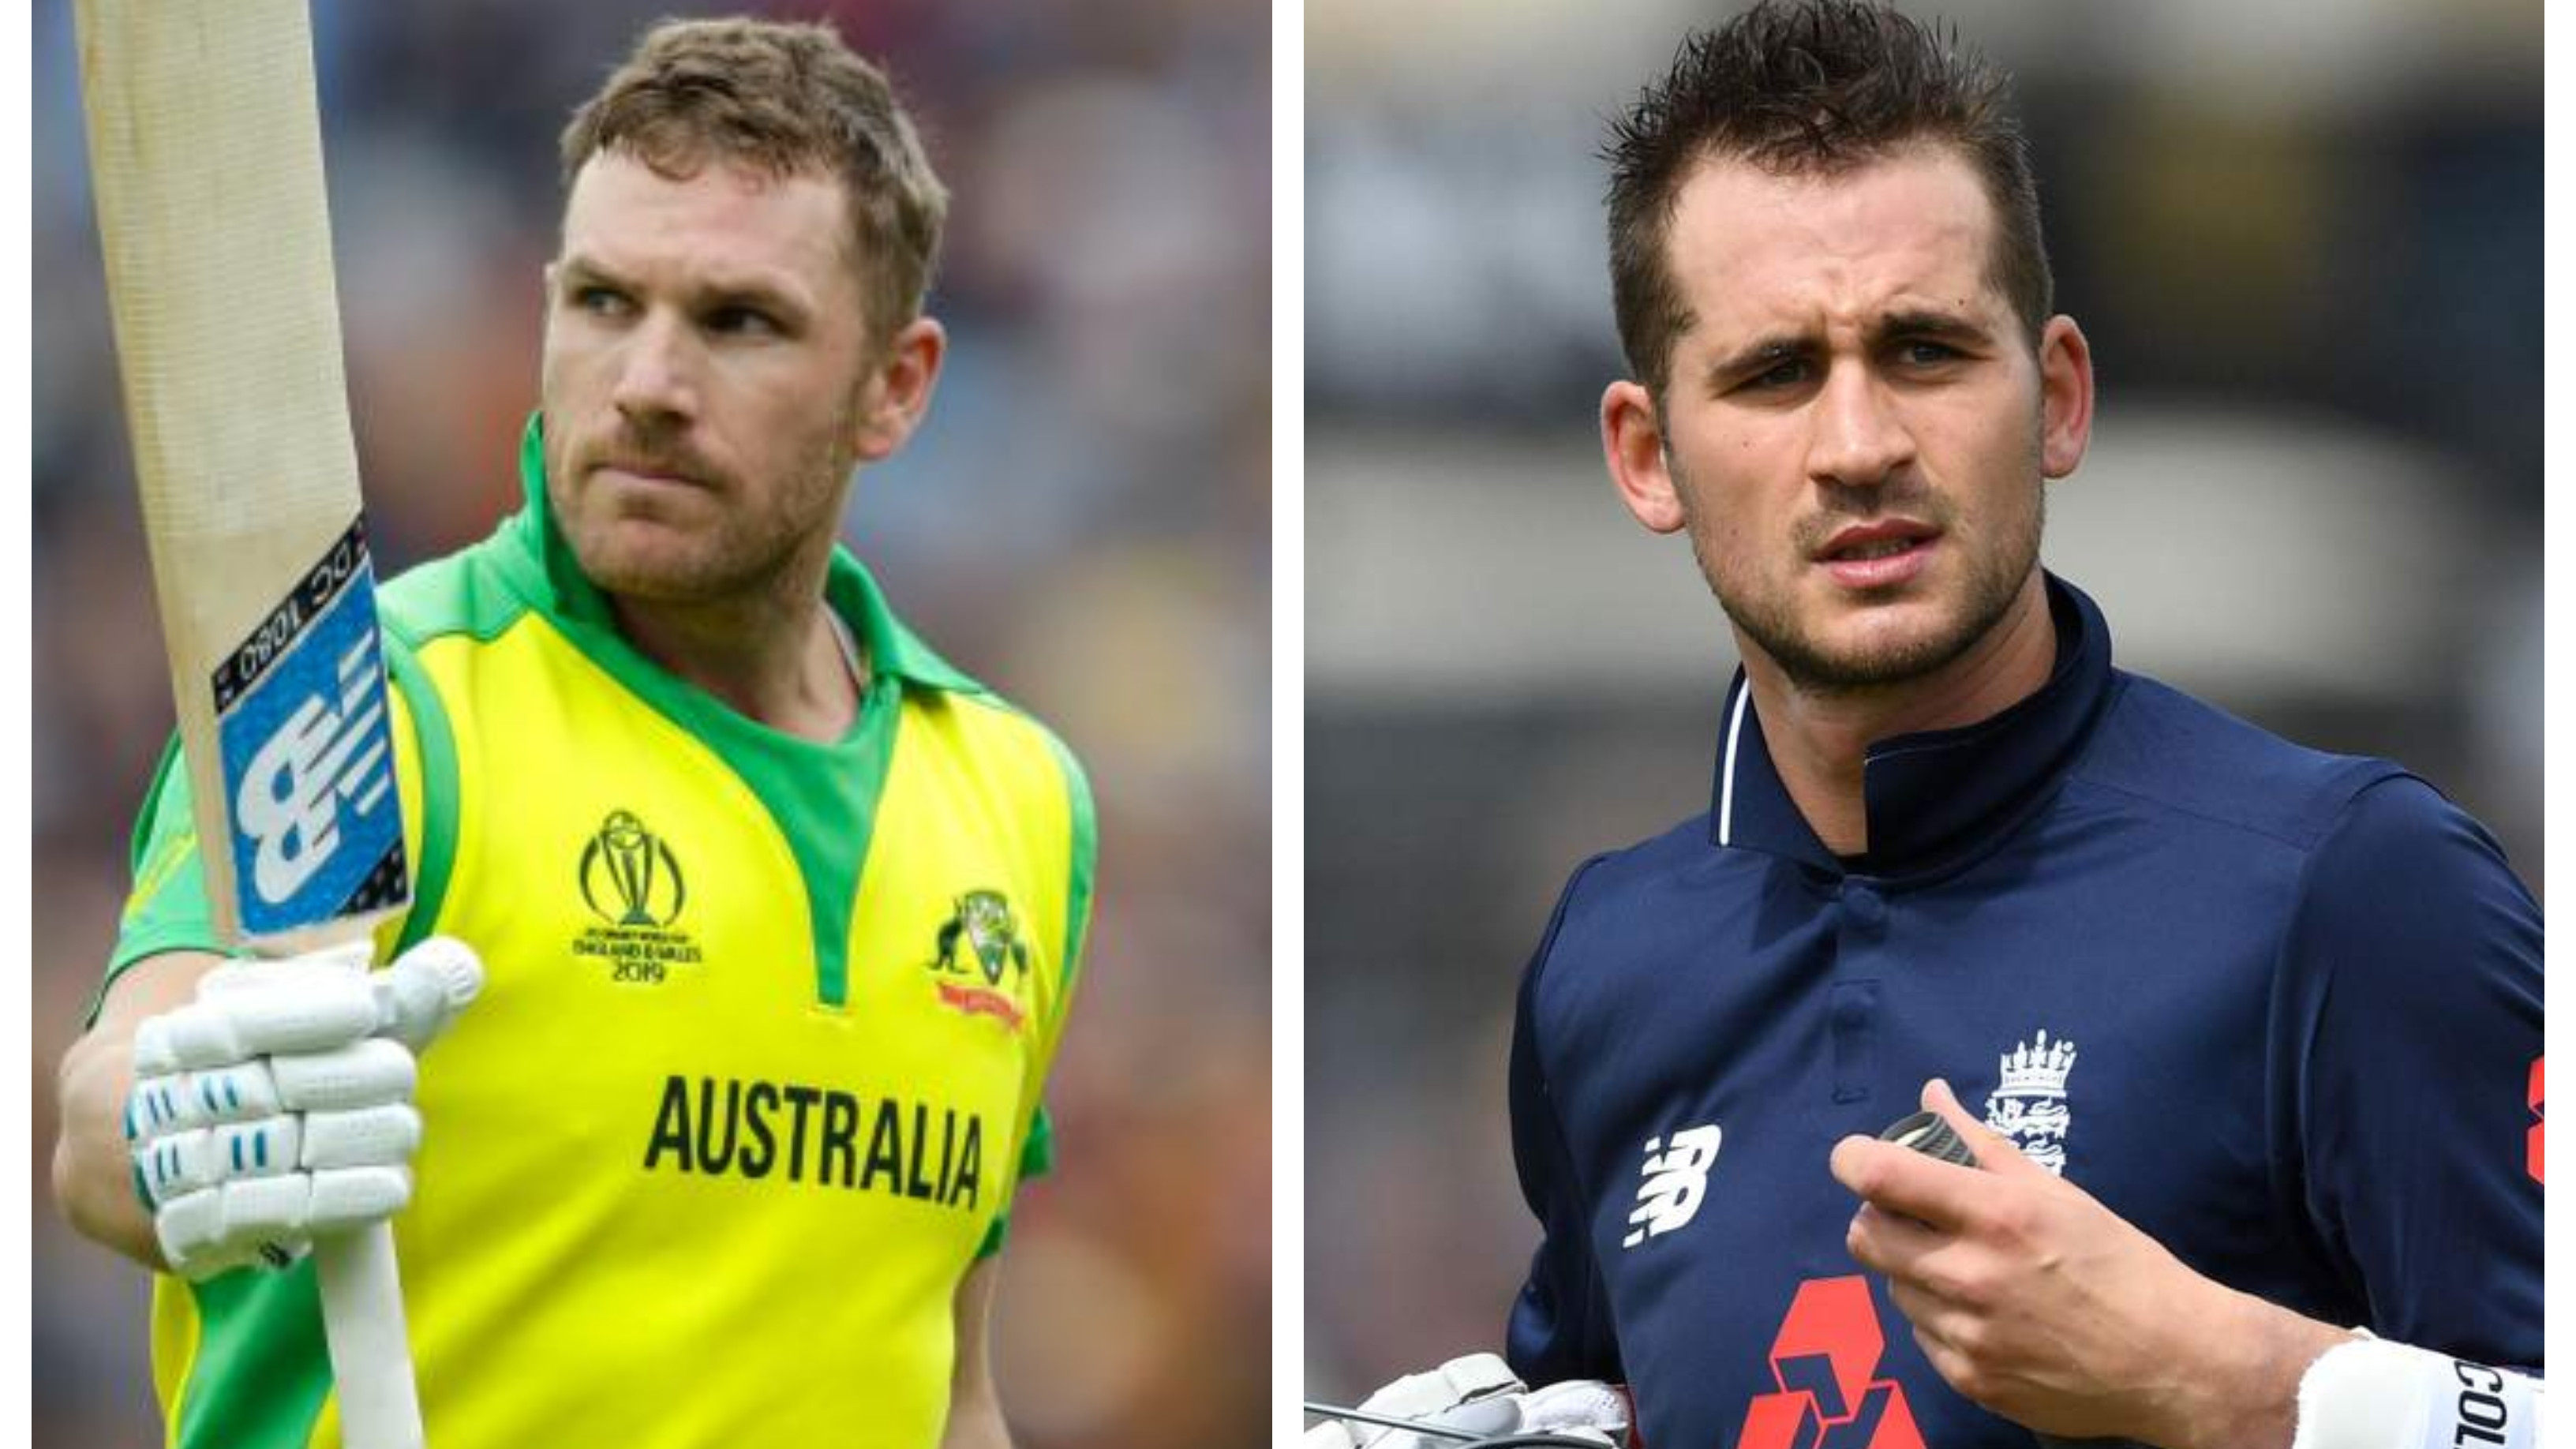 IPL 2022: Aaron Finch replaces Alex Hales in KKR line-up as latter pulls out of upcoming IPL